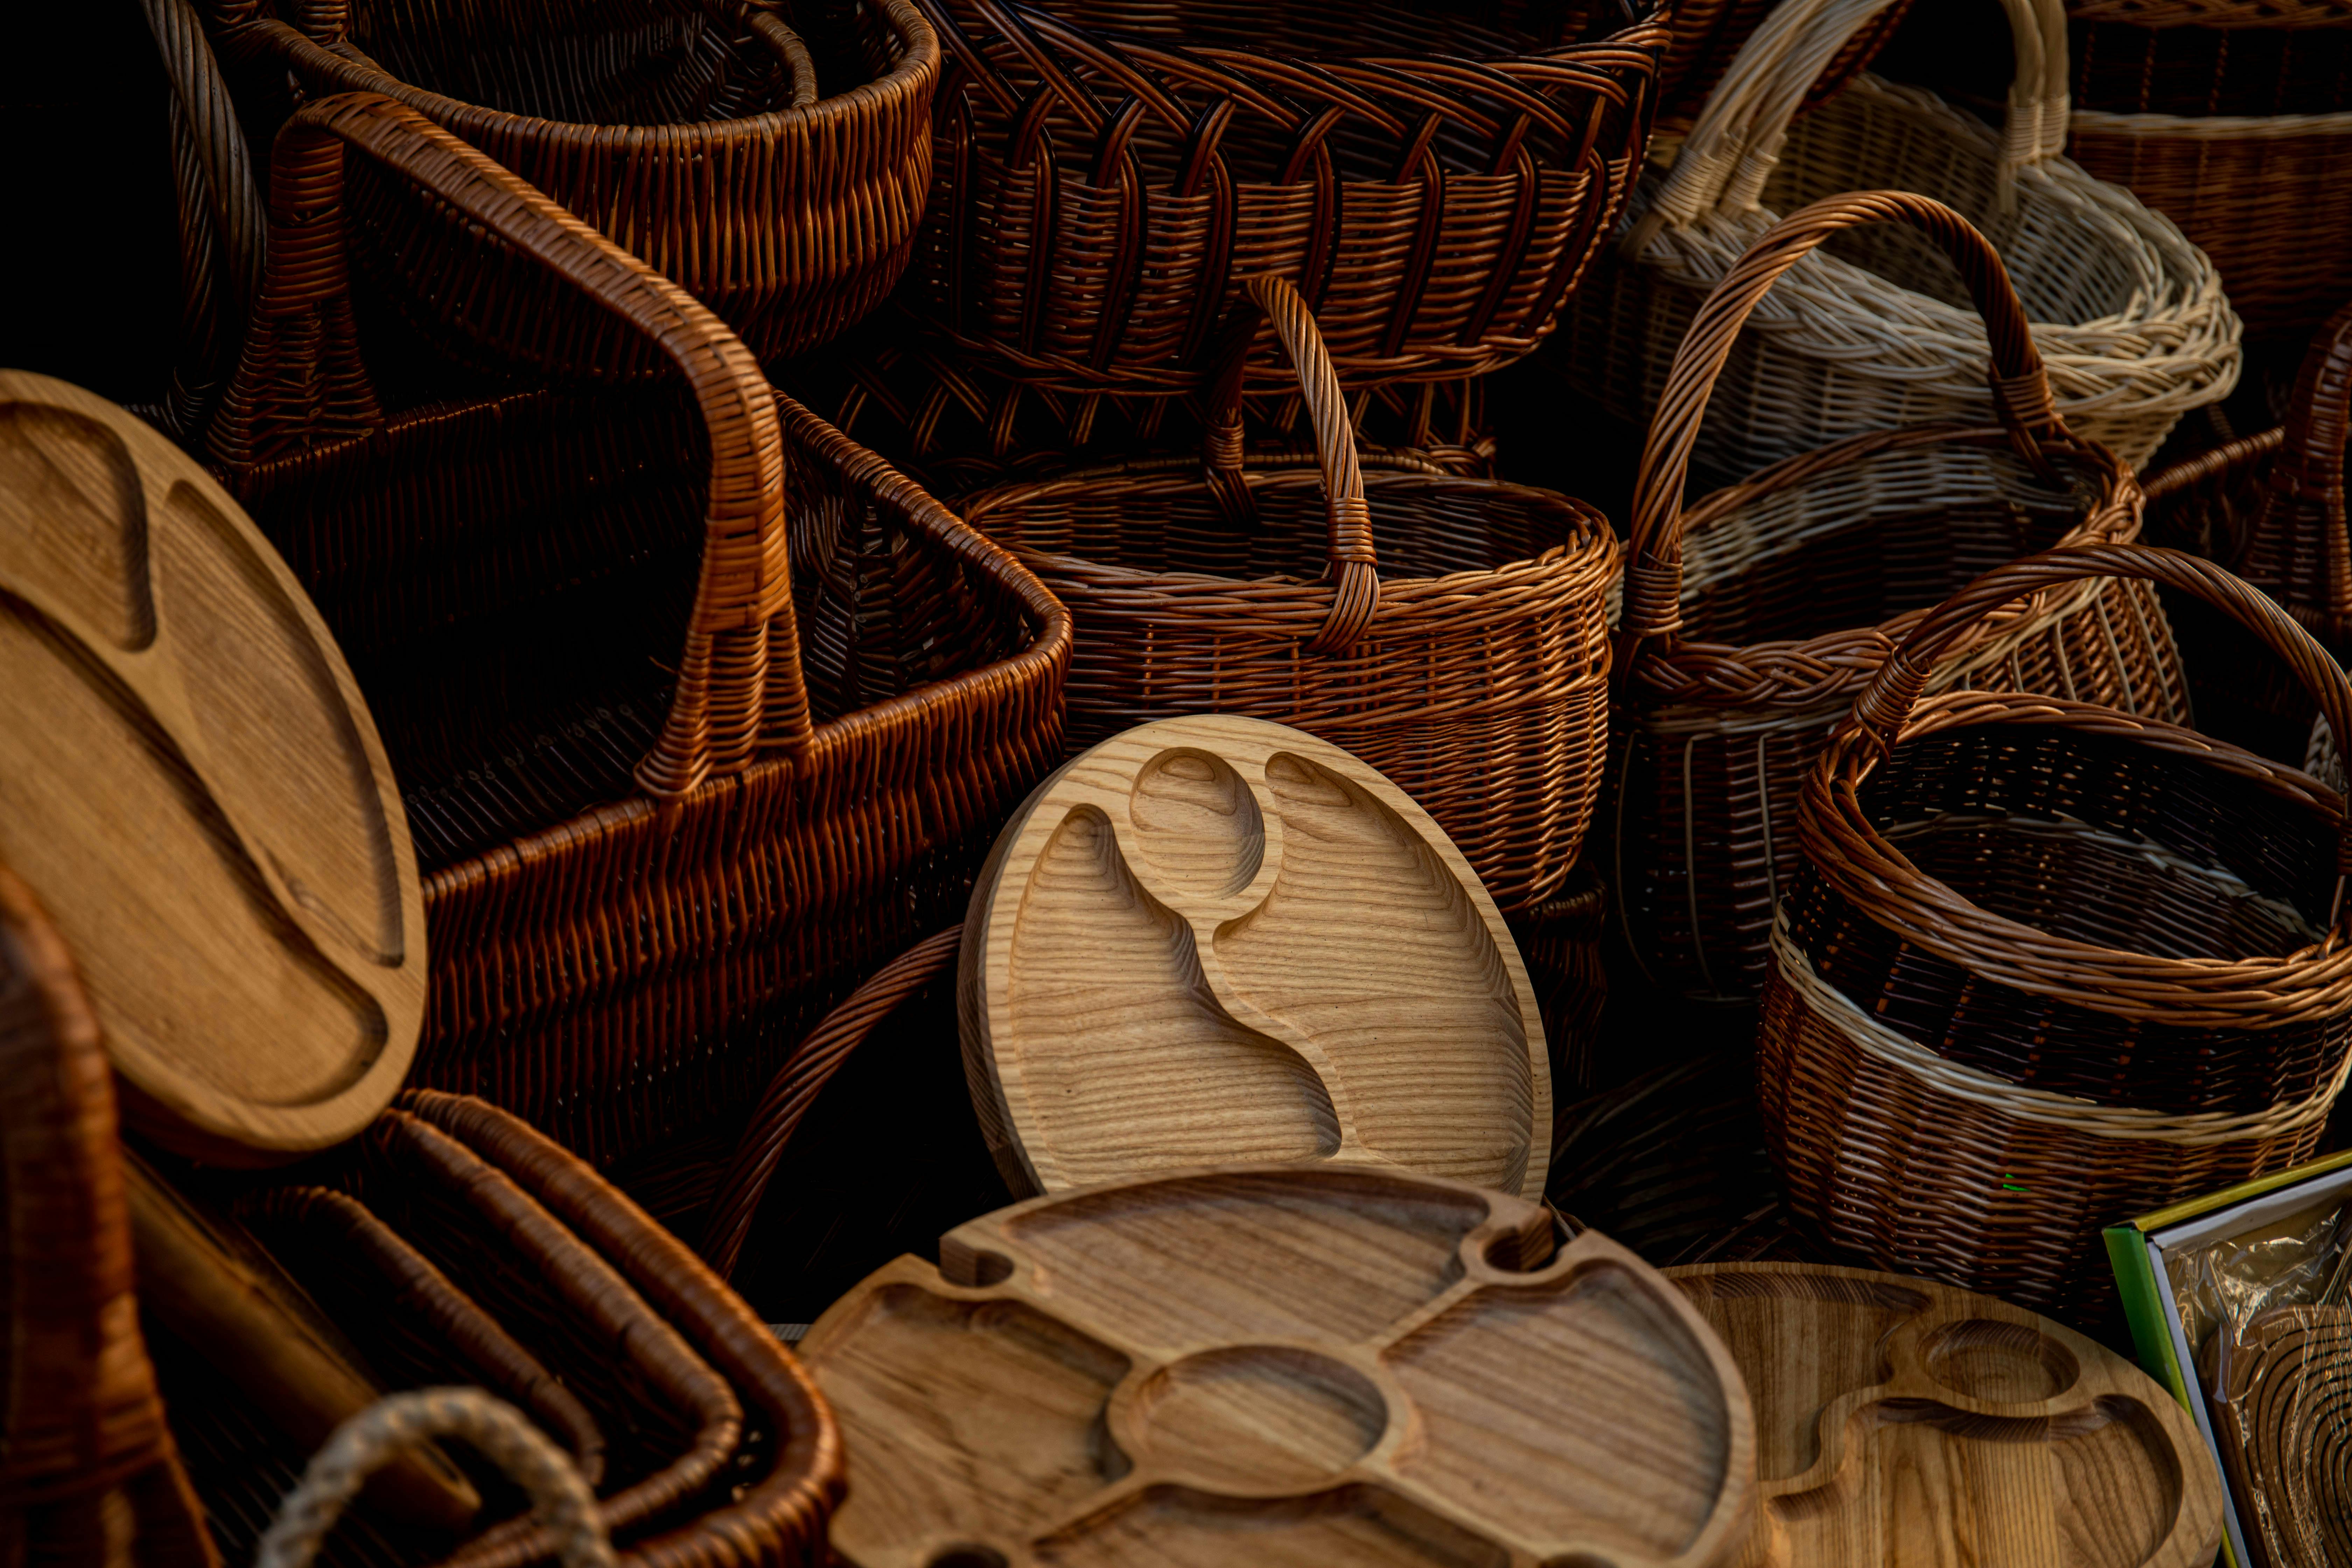 Variety of Woven Baskets and Wooden Trays · Free Stock Photo